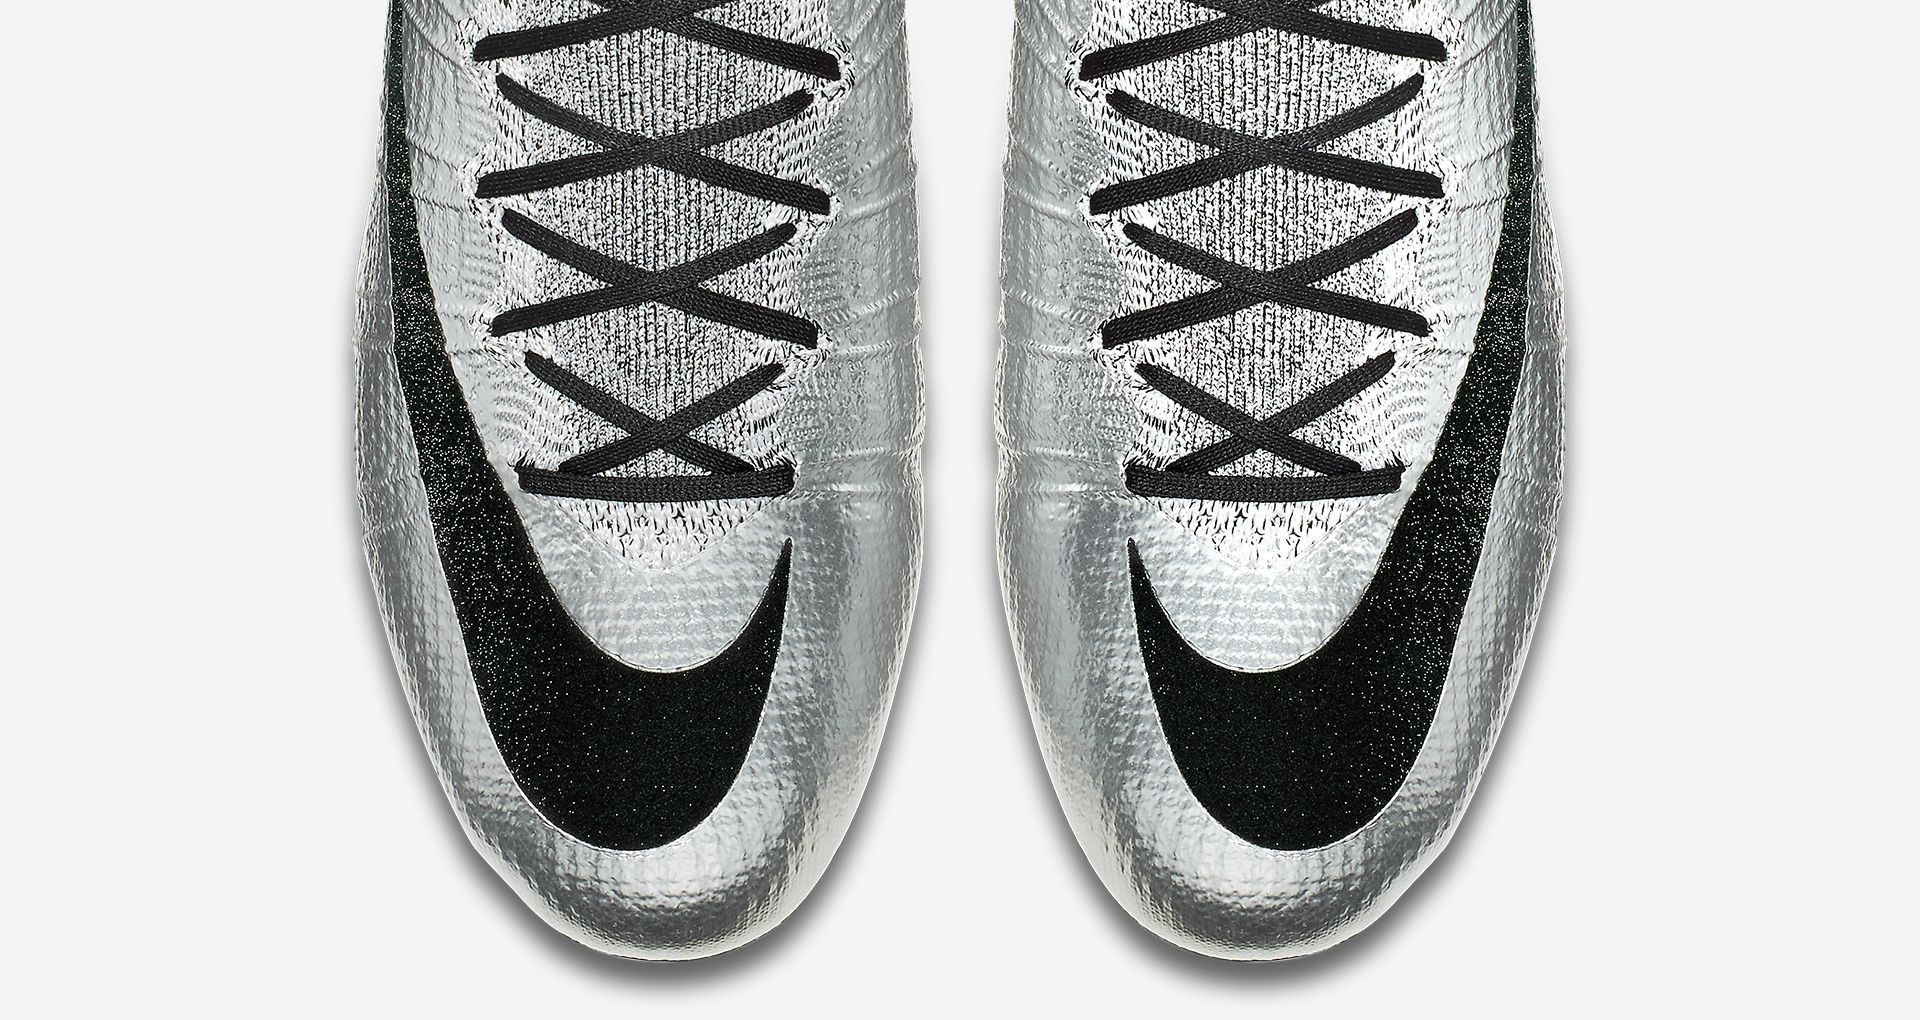 THE NIKE MERCURIAL SUPERFLY 6 AND VAPOR 12 ARE